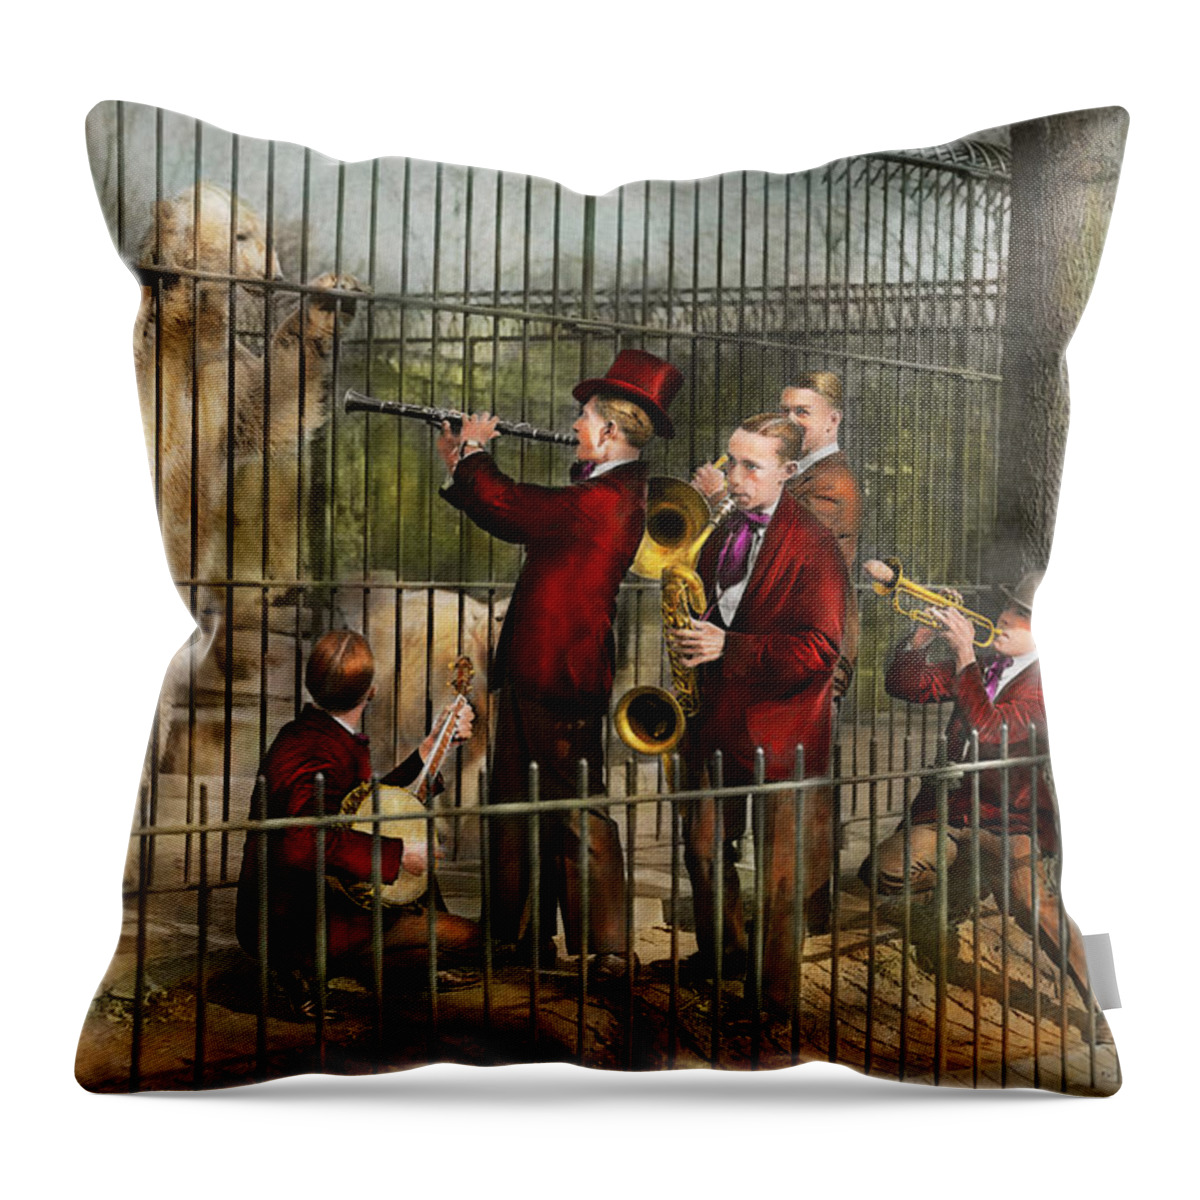 Jazz Throw Pillow featuring the photograph Music - How to annoy animals 1925 by Mike Savad